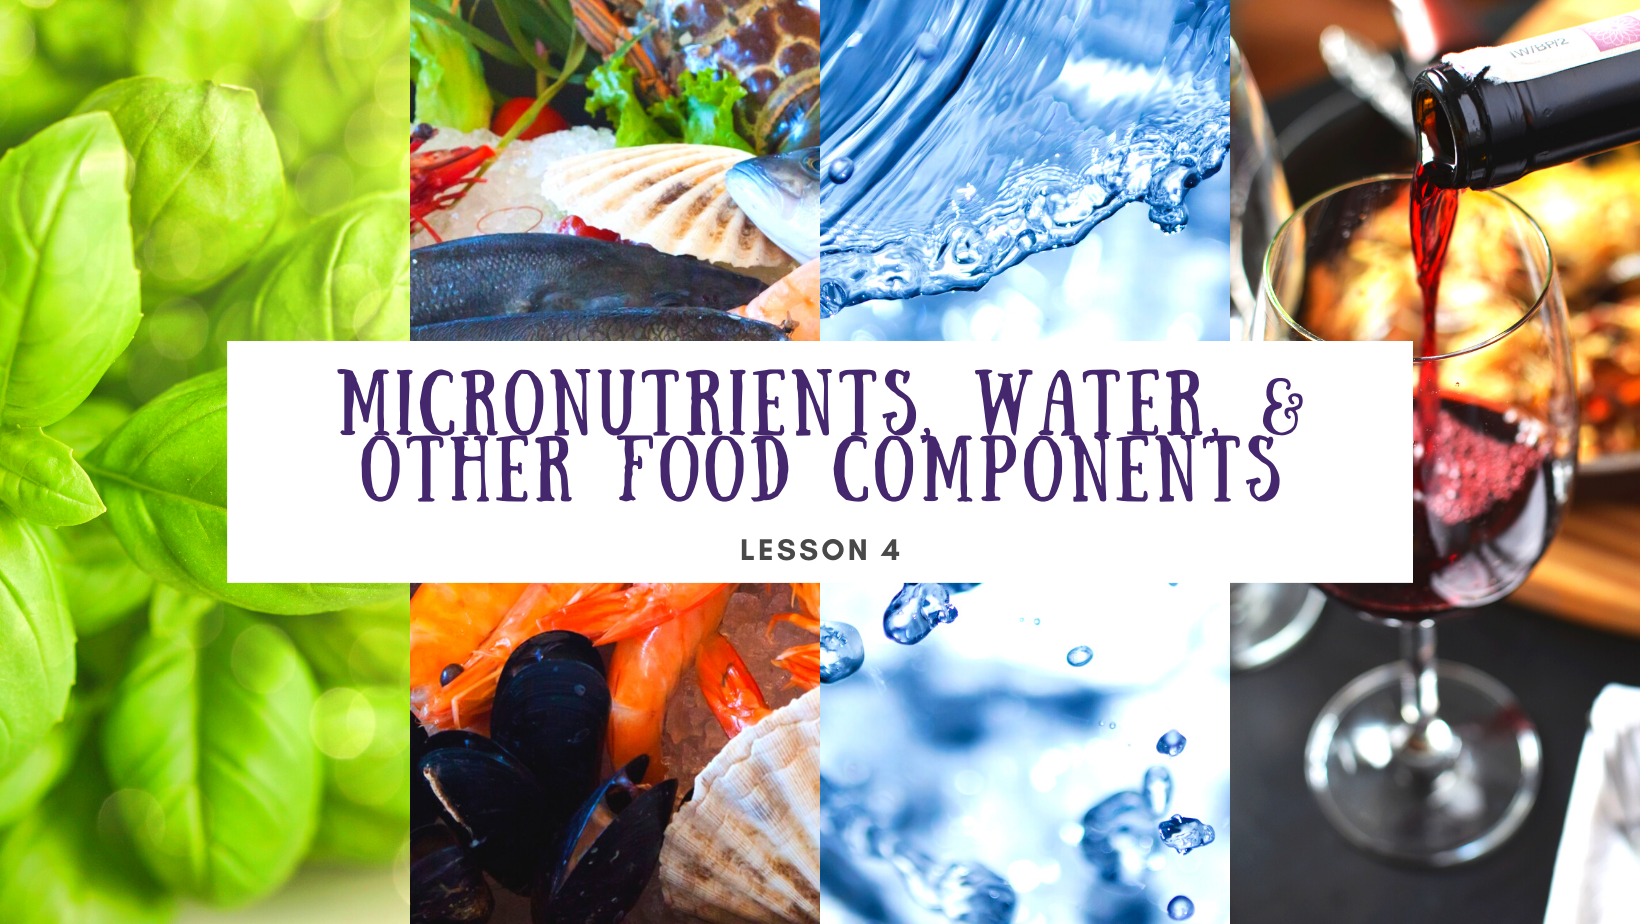 Lesson 4 Micronutrients, water, and other food components